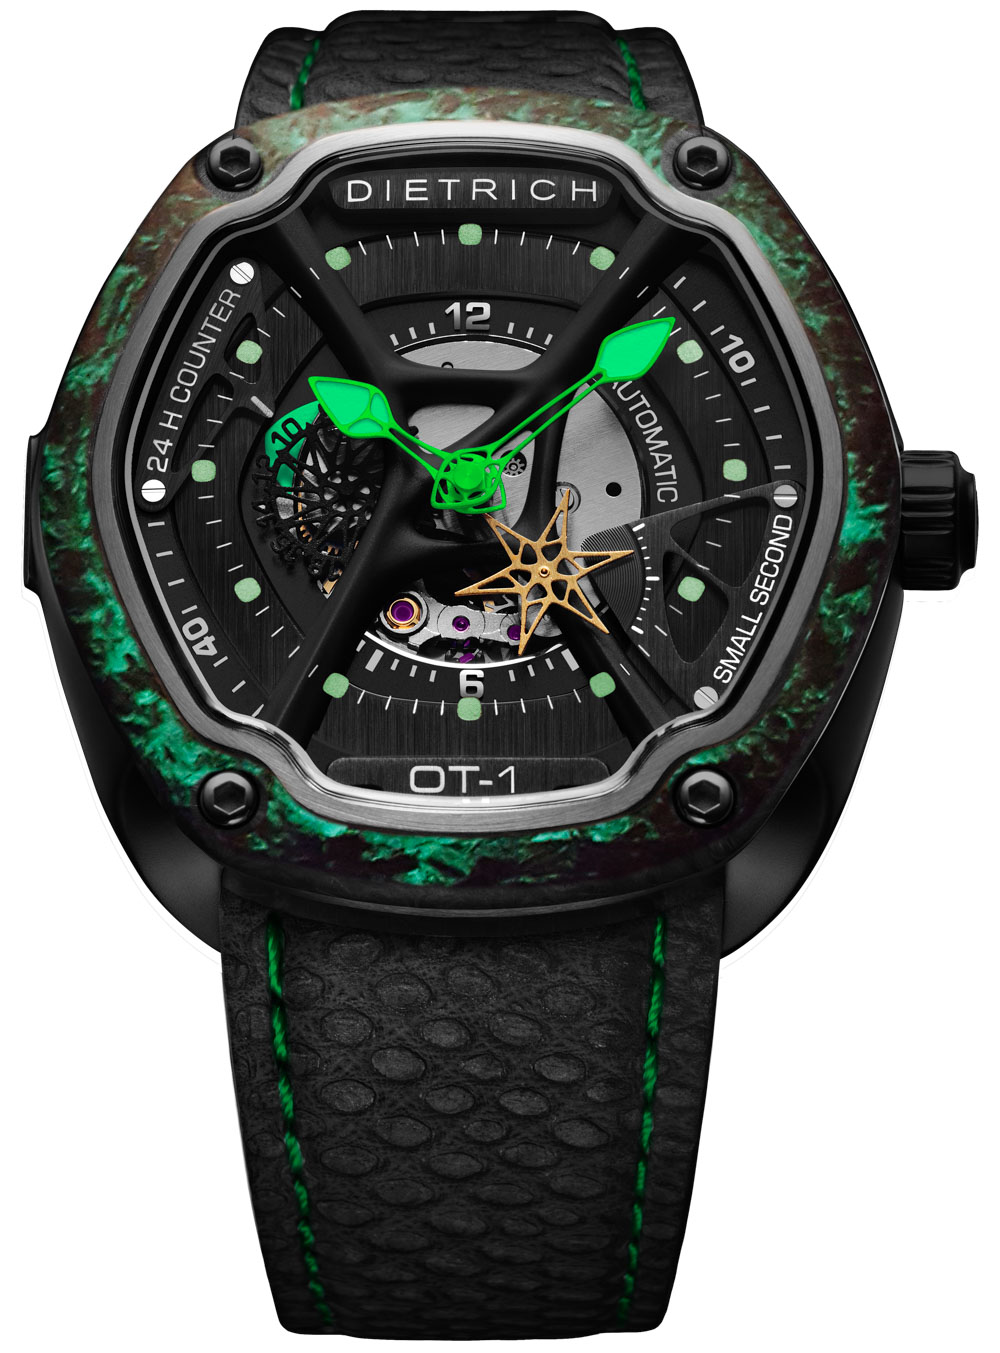 dietrich-otime-o-time-forged-carbon-ablogtowatch-1